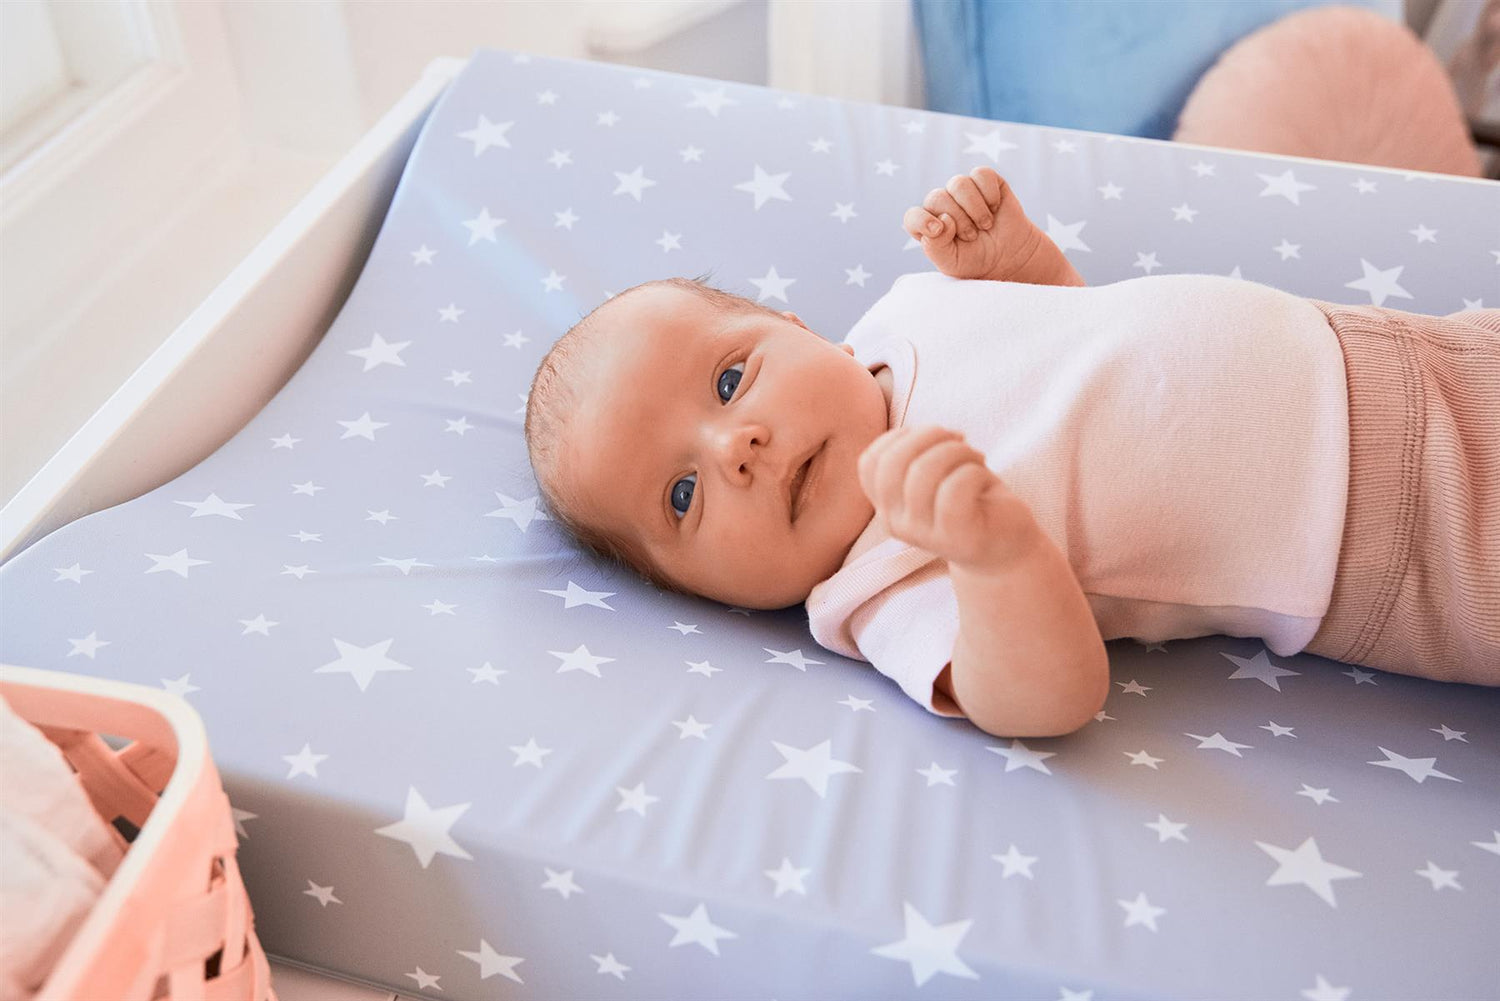 Baby Changing Mat Padded Soft Base 70x50cm Waterproof Raised Edges Milky Way